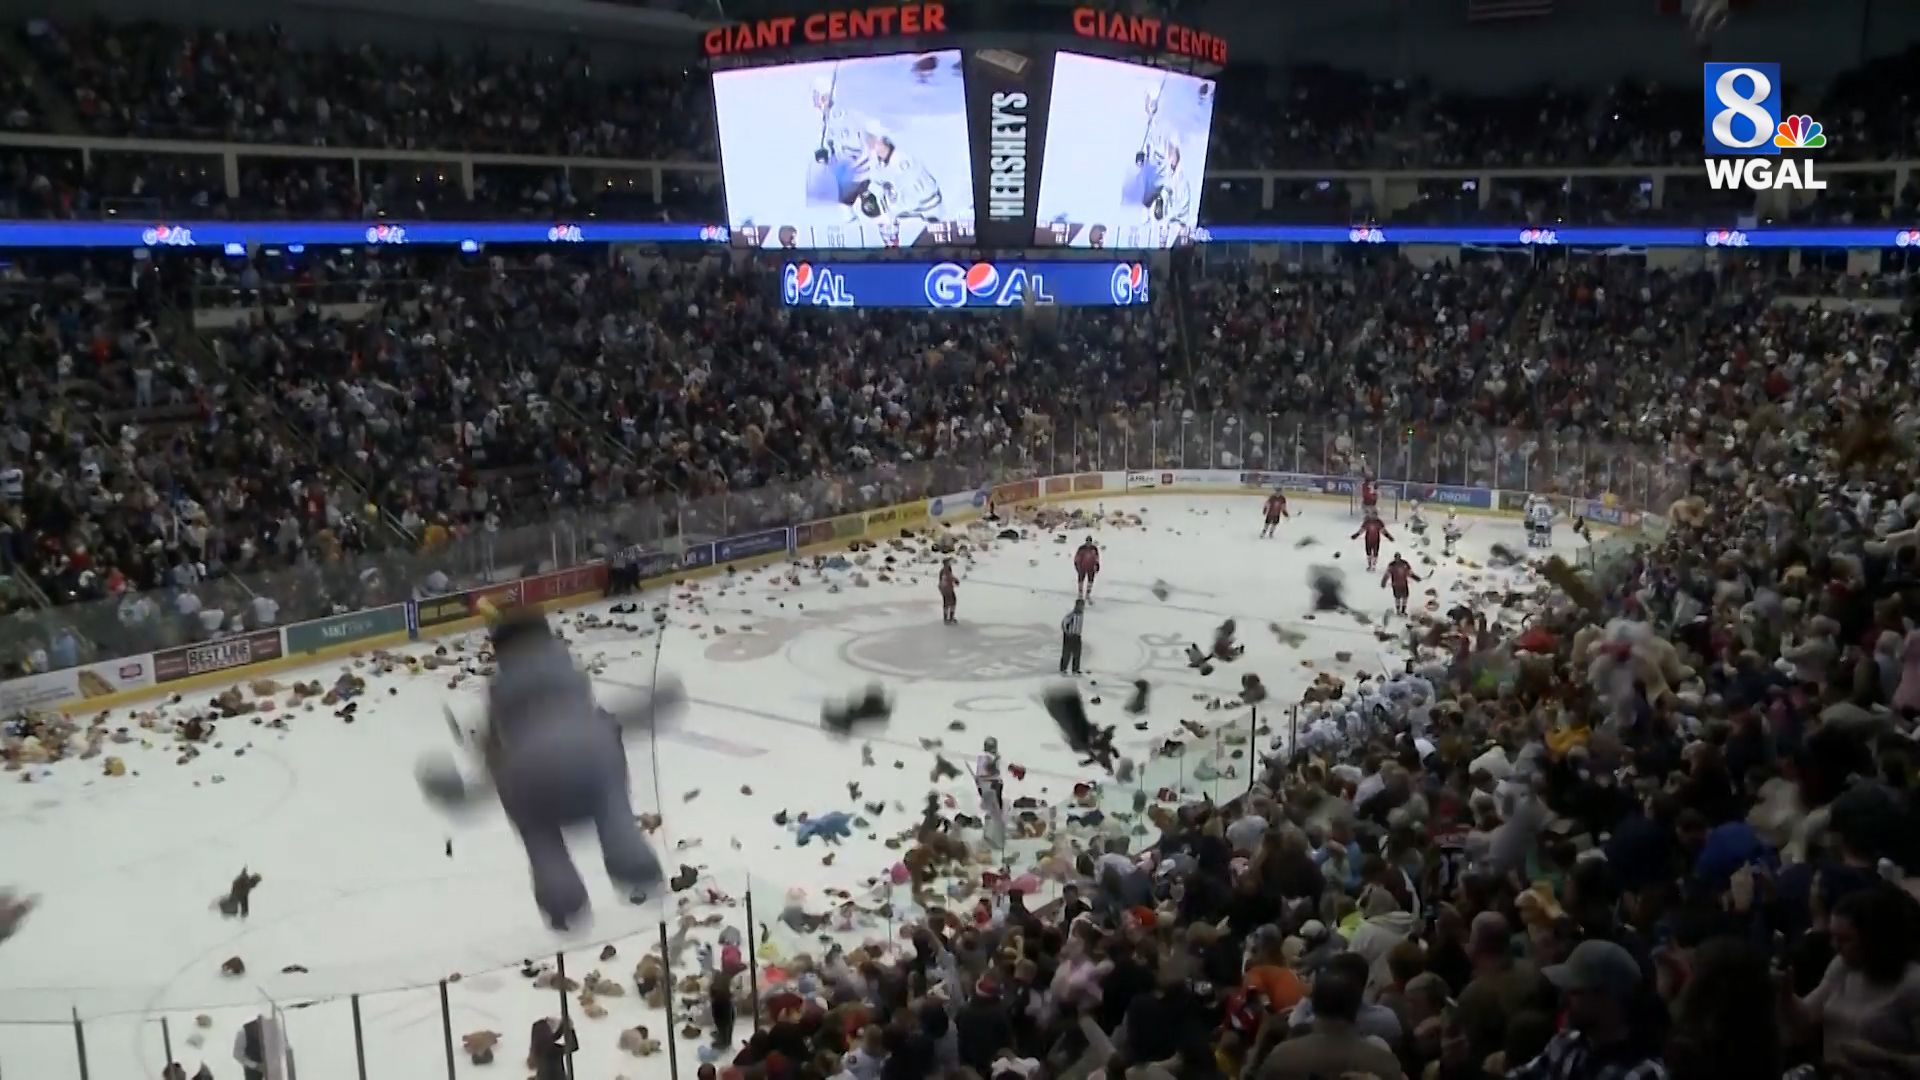 Video Its a record! Fans toss more than 34,000 Teddy Bears onto ice at Hershey Bears game